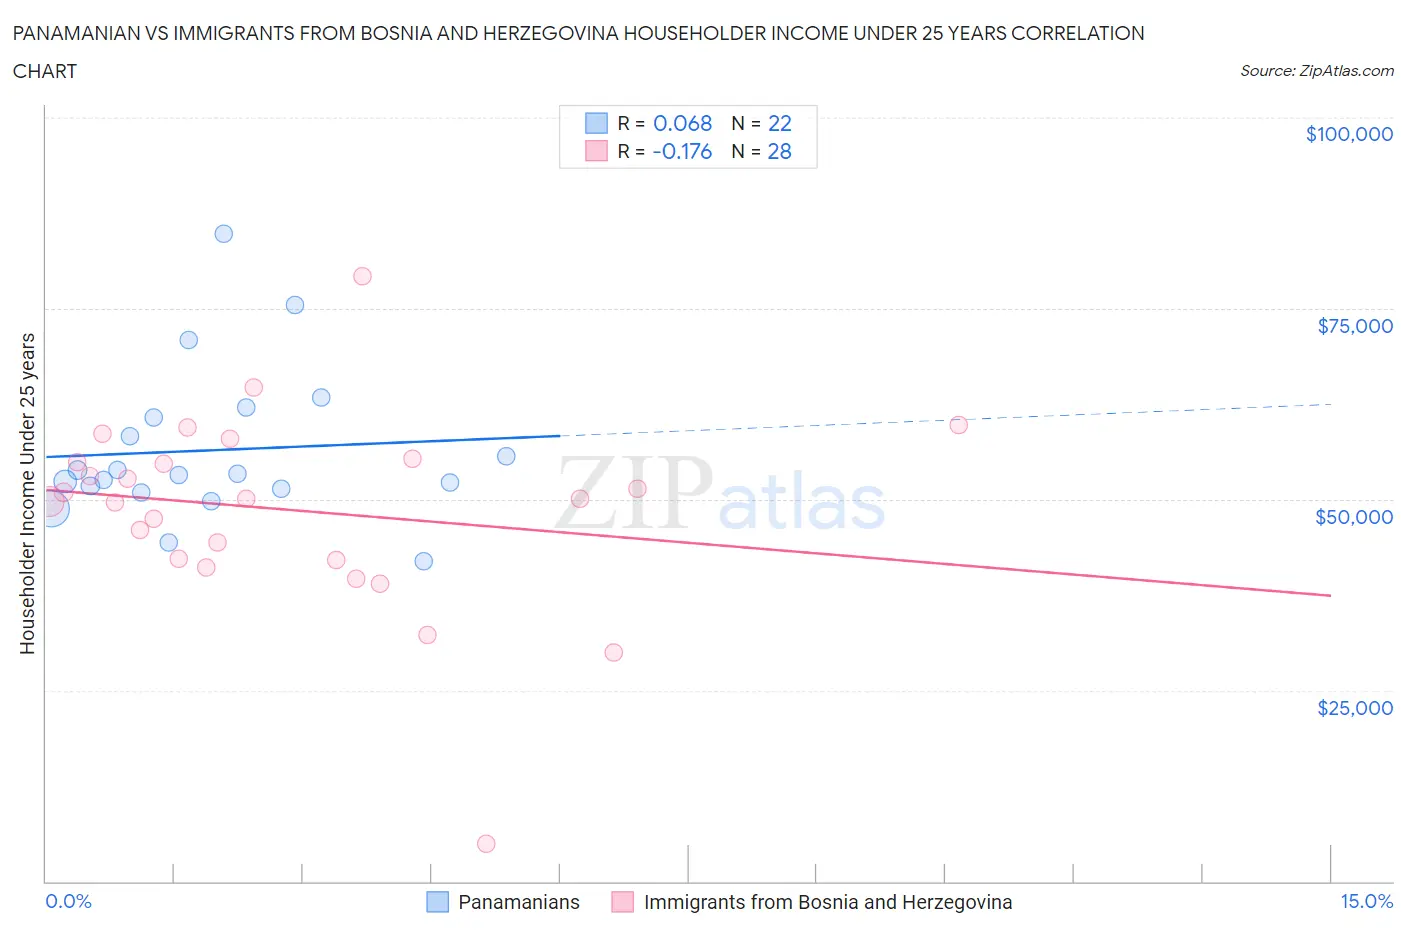 Panamanian vs Immigrants from Bosnia and Herzegovina Householder Income Under 25 years